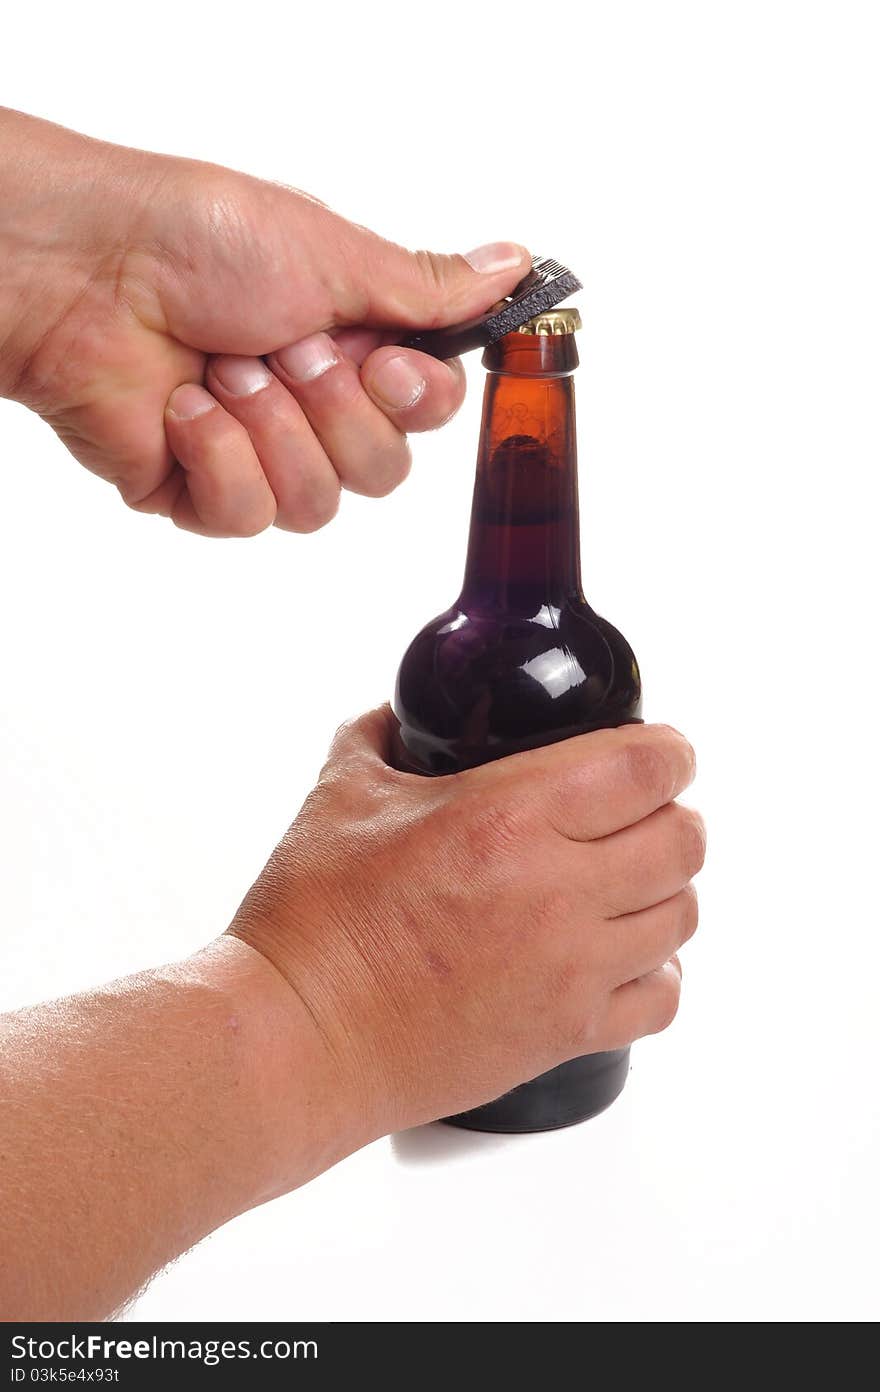 Photograph of human hands opening a bottle of beer